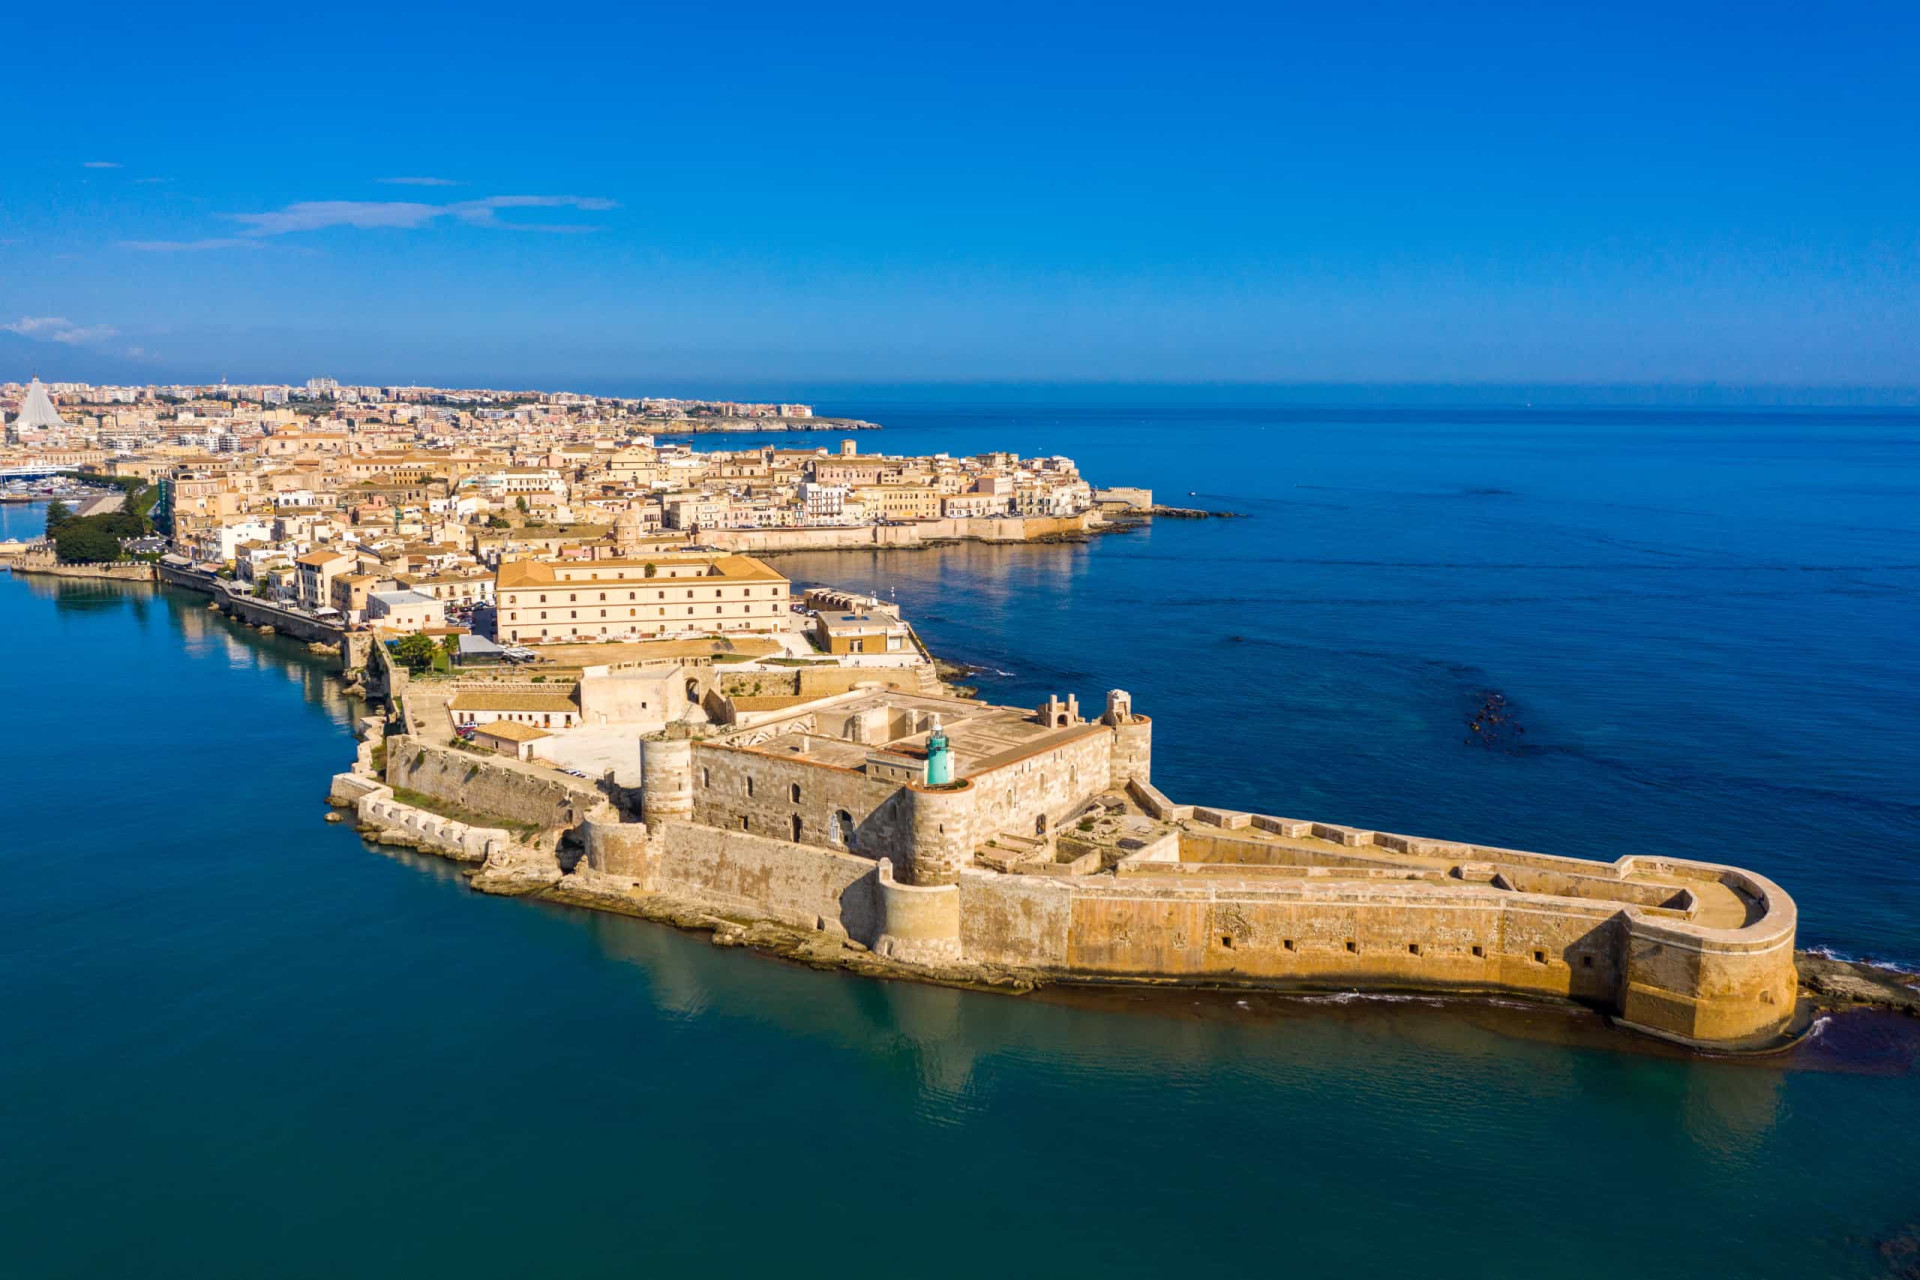 <p>Ortigia Island is the historical center of the city of Syracuse and widely considered one of the most beautiful destinations in Sicily.</p><p>You may also like:<a href="https://www.starsinsider.com/n/499658?utm_source=msn.com&utm_medium=display&utm_campaign=referral_description&utm_content=481361v4en-en_selected"> Ways you're most likely to die at every age in America</a></p>